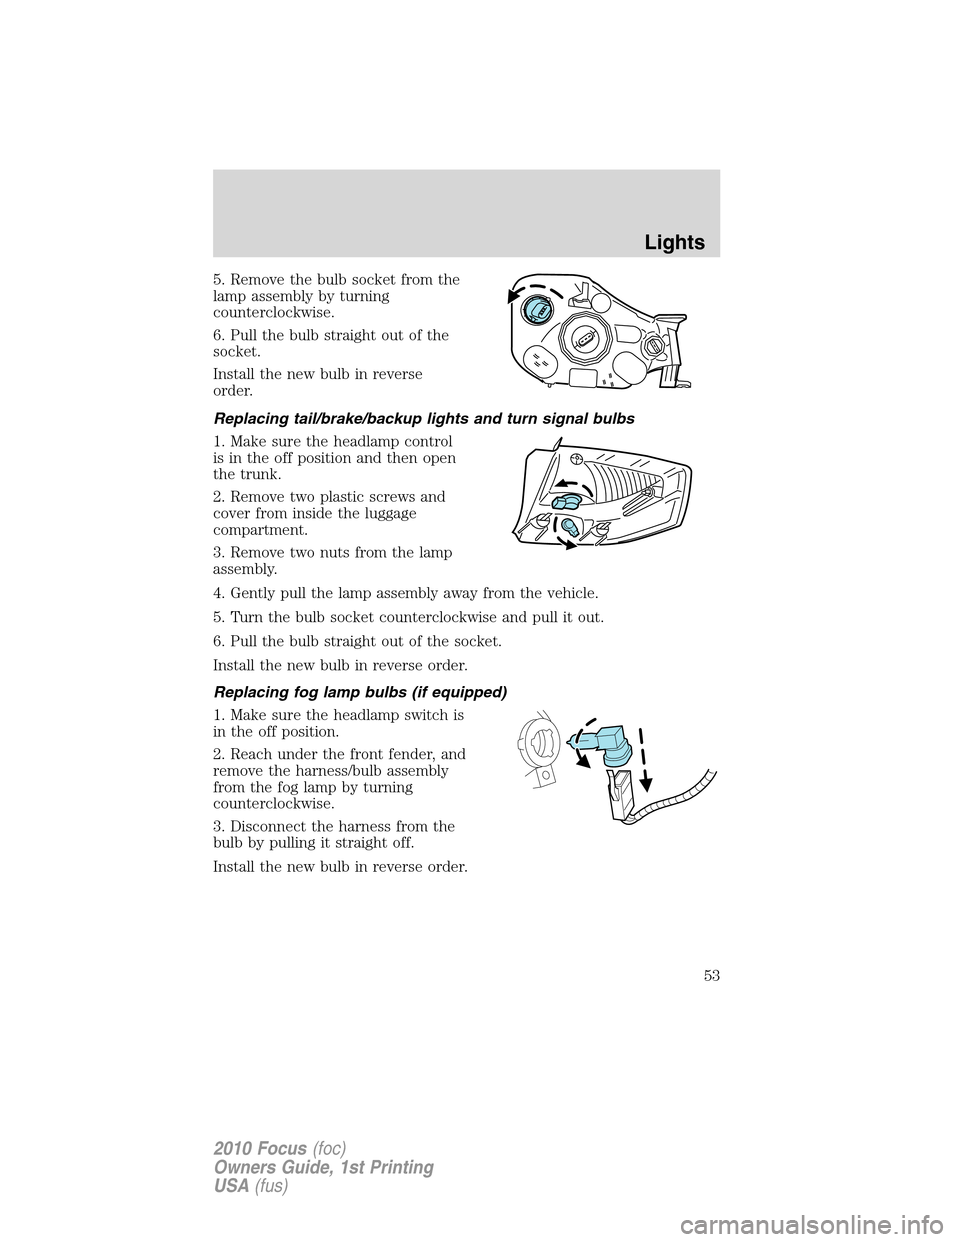 FORD FOCUS 2010 2.G Owners Manual 5. Remove the bulb socket from the
lamp assembly by turning
counterclockwise.
6. Pull the bulb straight out of the
socket.
Install the new bulb in reverse
order.
Replacing tail/brake/backup lights and